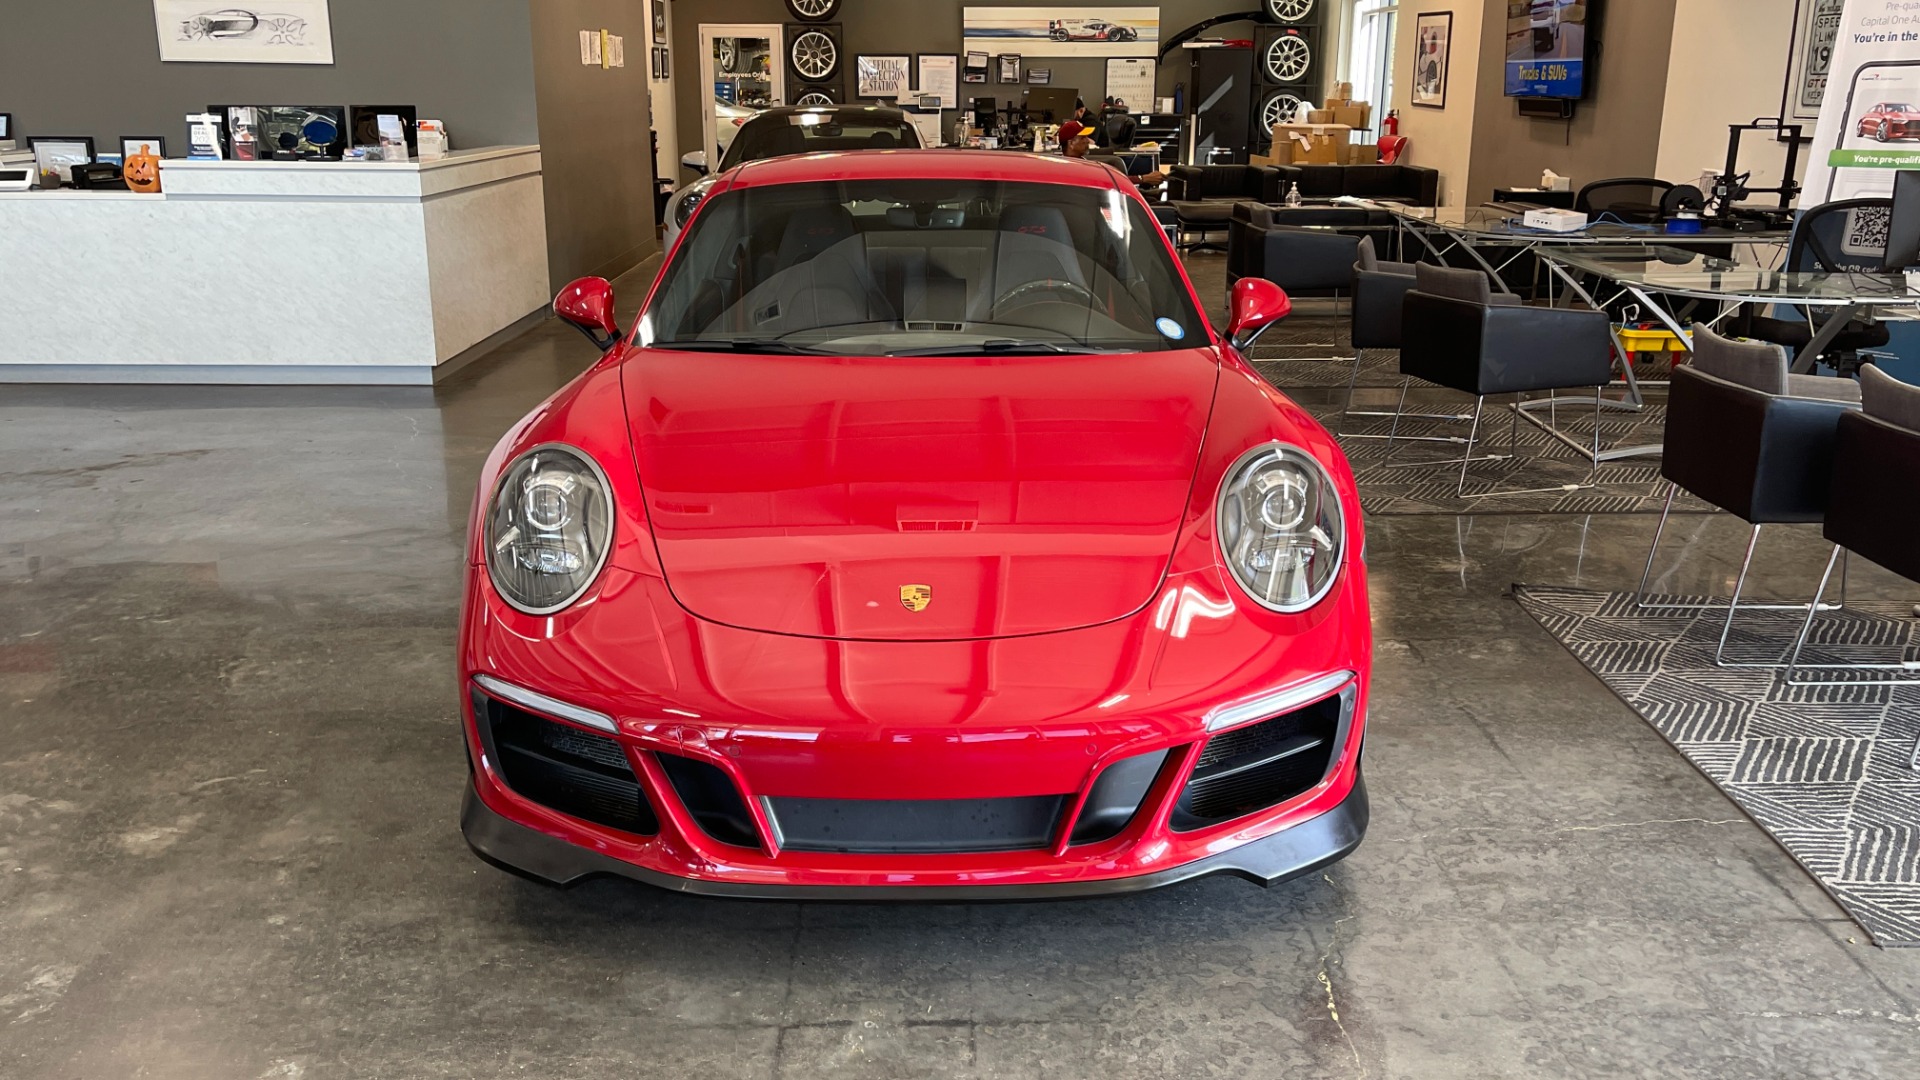 Used 2019 Porsche 911 Carrera GTS / TITANIUM EXHAUST / CARBON FIBER / TECHART SPRINGS / BBS WHEEL for sale $123,995 at Formula Imports in Charlotte NC 28227 5